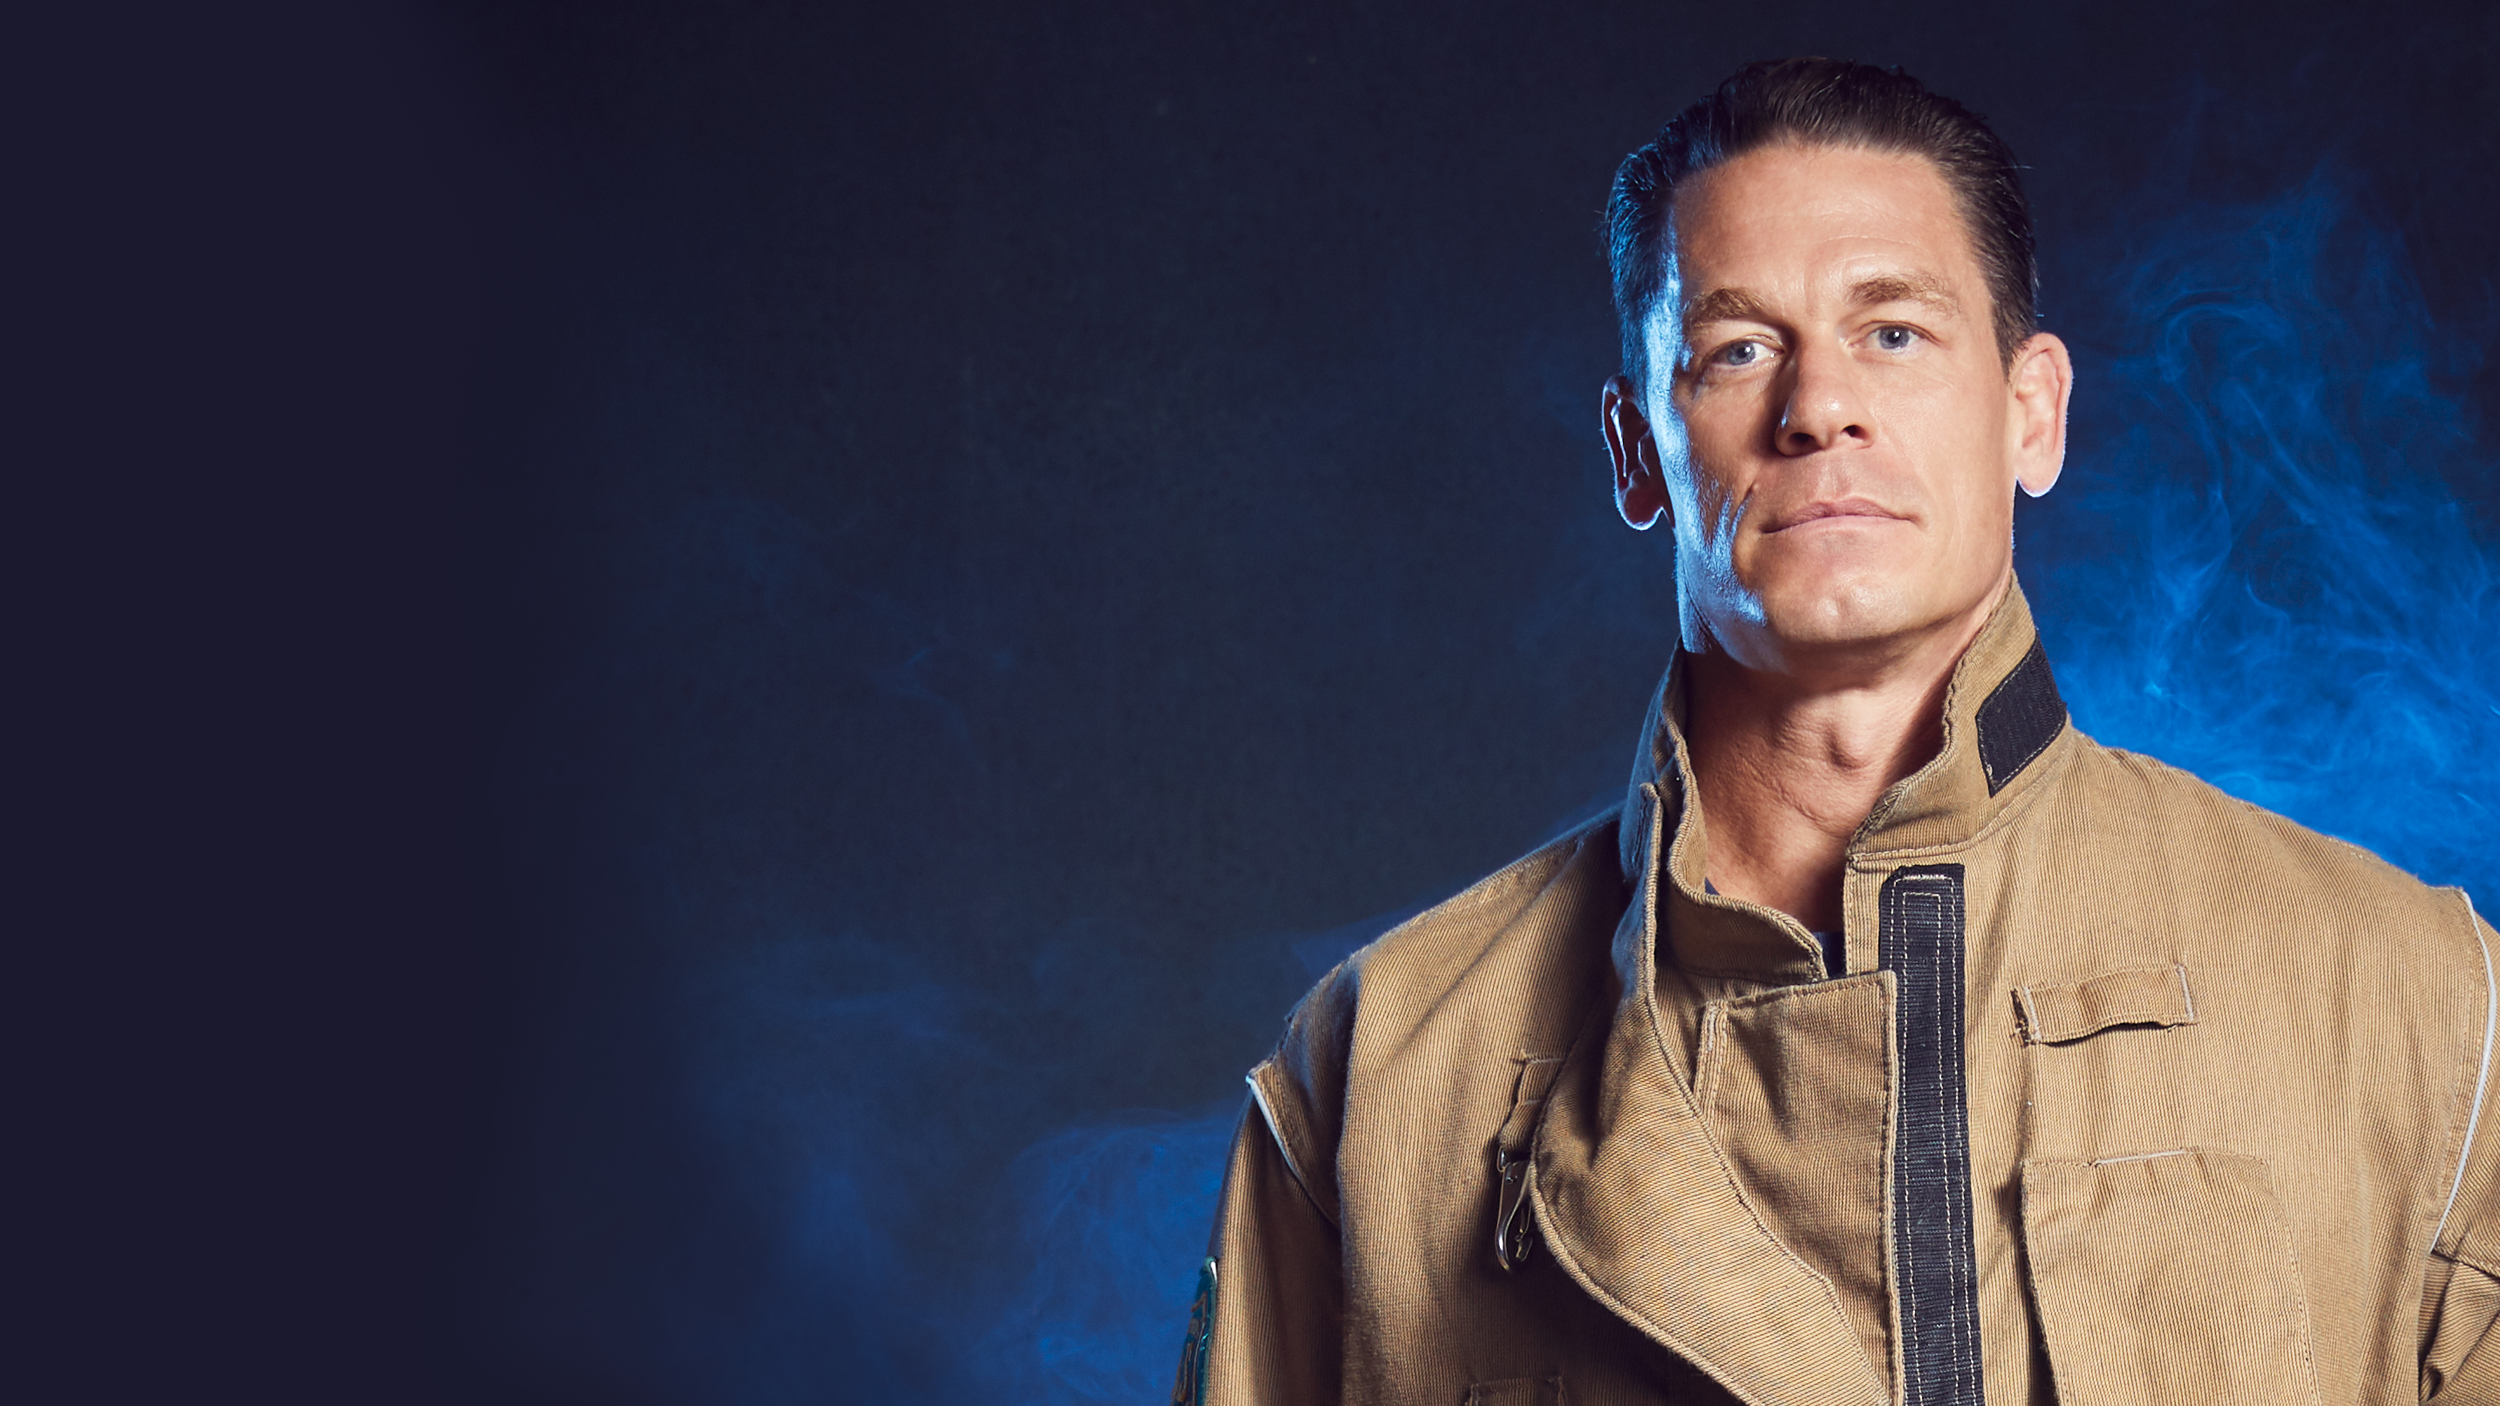 John Cena On Wwe His New Movie Playing With Fire And